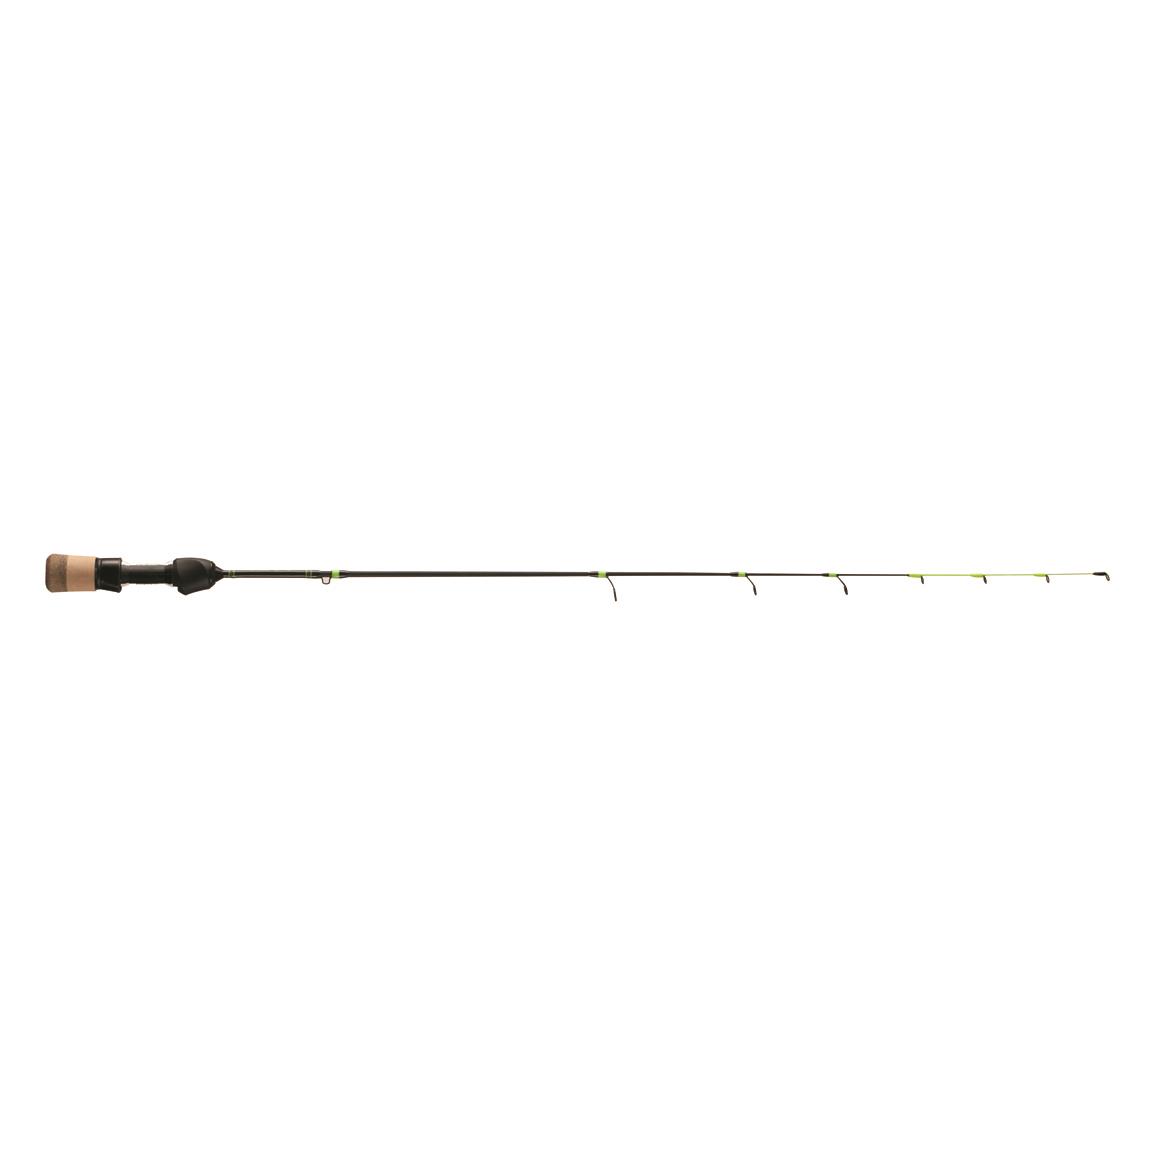 13 Fishing Tickle Stick Ice Fishing Rod, 27 Length, Medium Light Power -  728922, Ice Fishing Rods at Sportsman's Guide